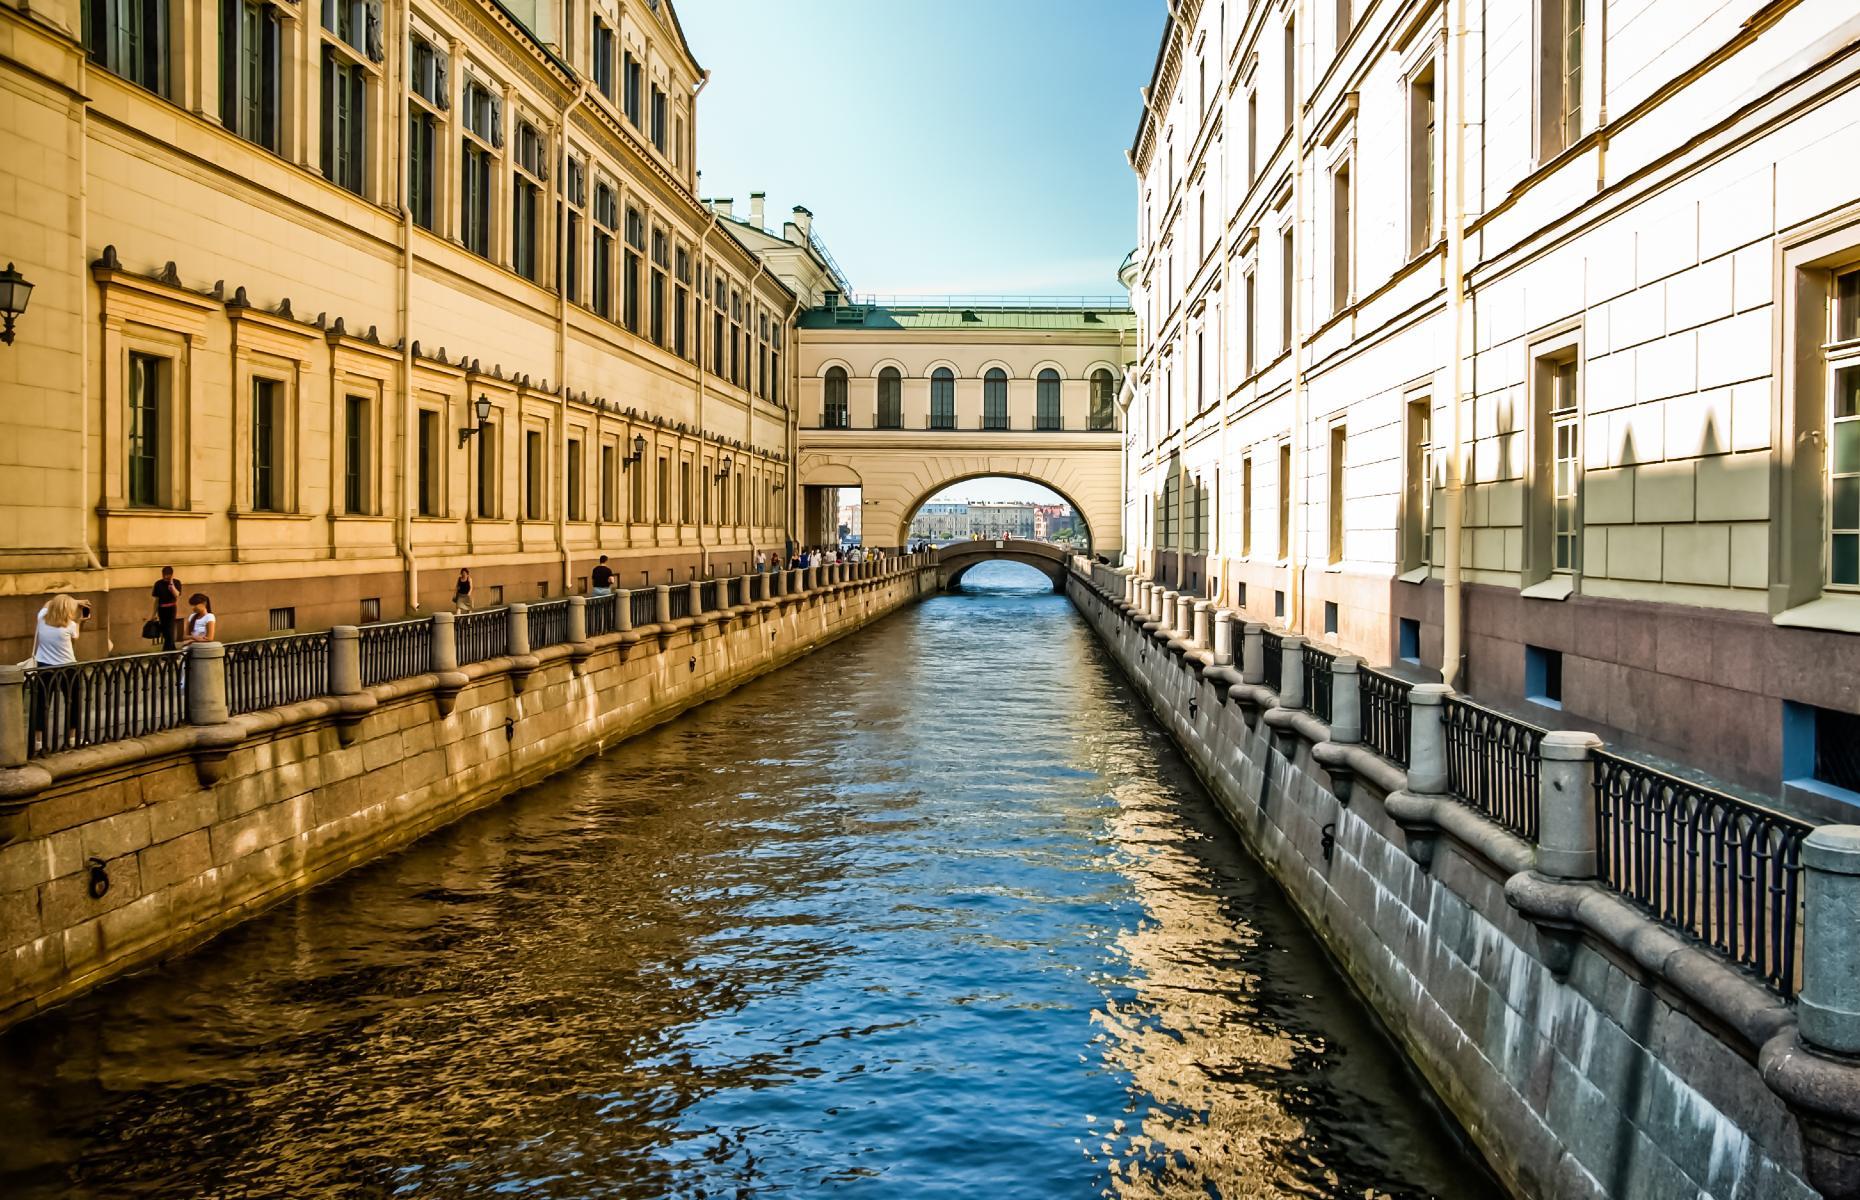 A spectacular strip of the historic Russian city, St Petersburg’s Winter Canal may be small but it makes up for it in its sheer beauty. Built in the 18th century, the Winter Canal is just 748 feet (228m) long making it one of the shortest canals in St Petersburg. Sandwiched between the lavish Old Hermitage and the Hermitage Theatre buildings, the city’s first stone bridge joins the two sides across the water and is truly a sight to behold.